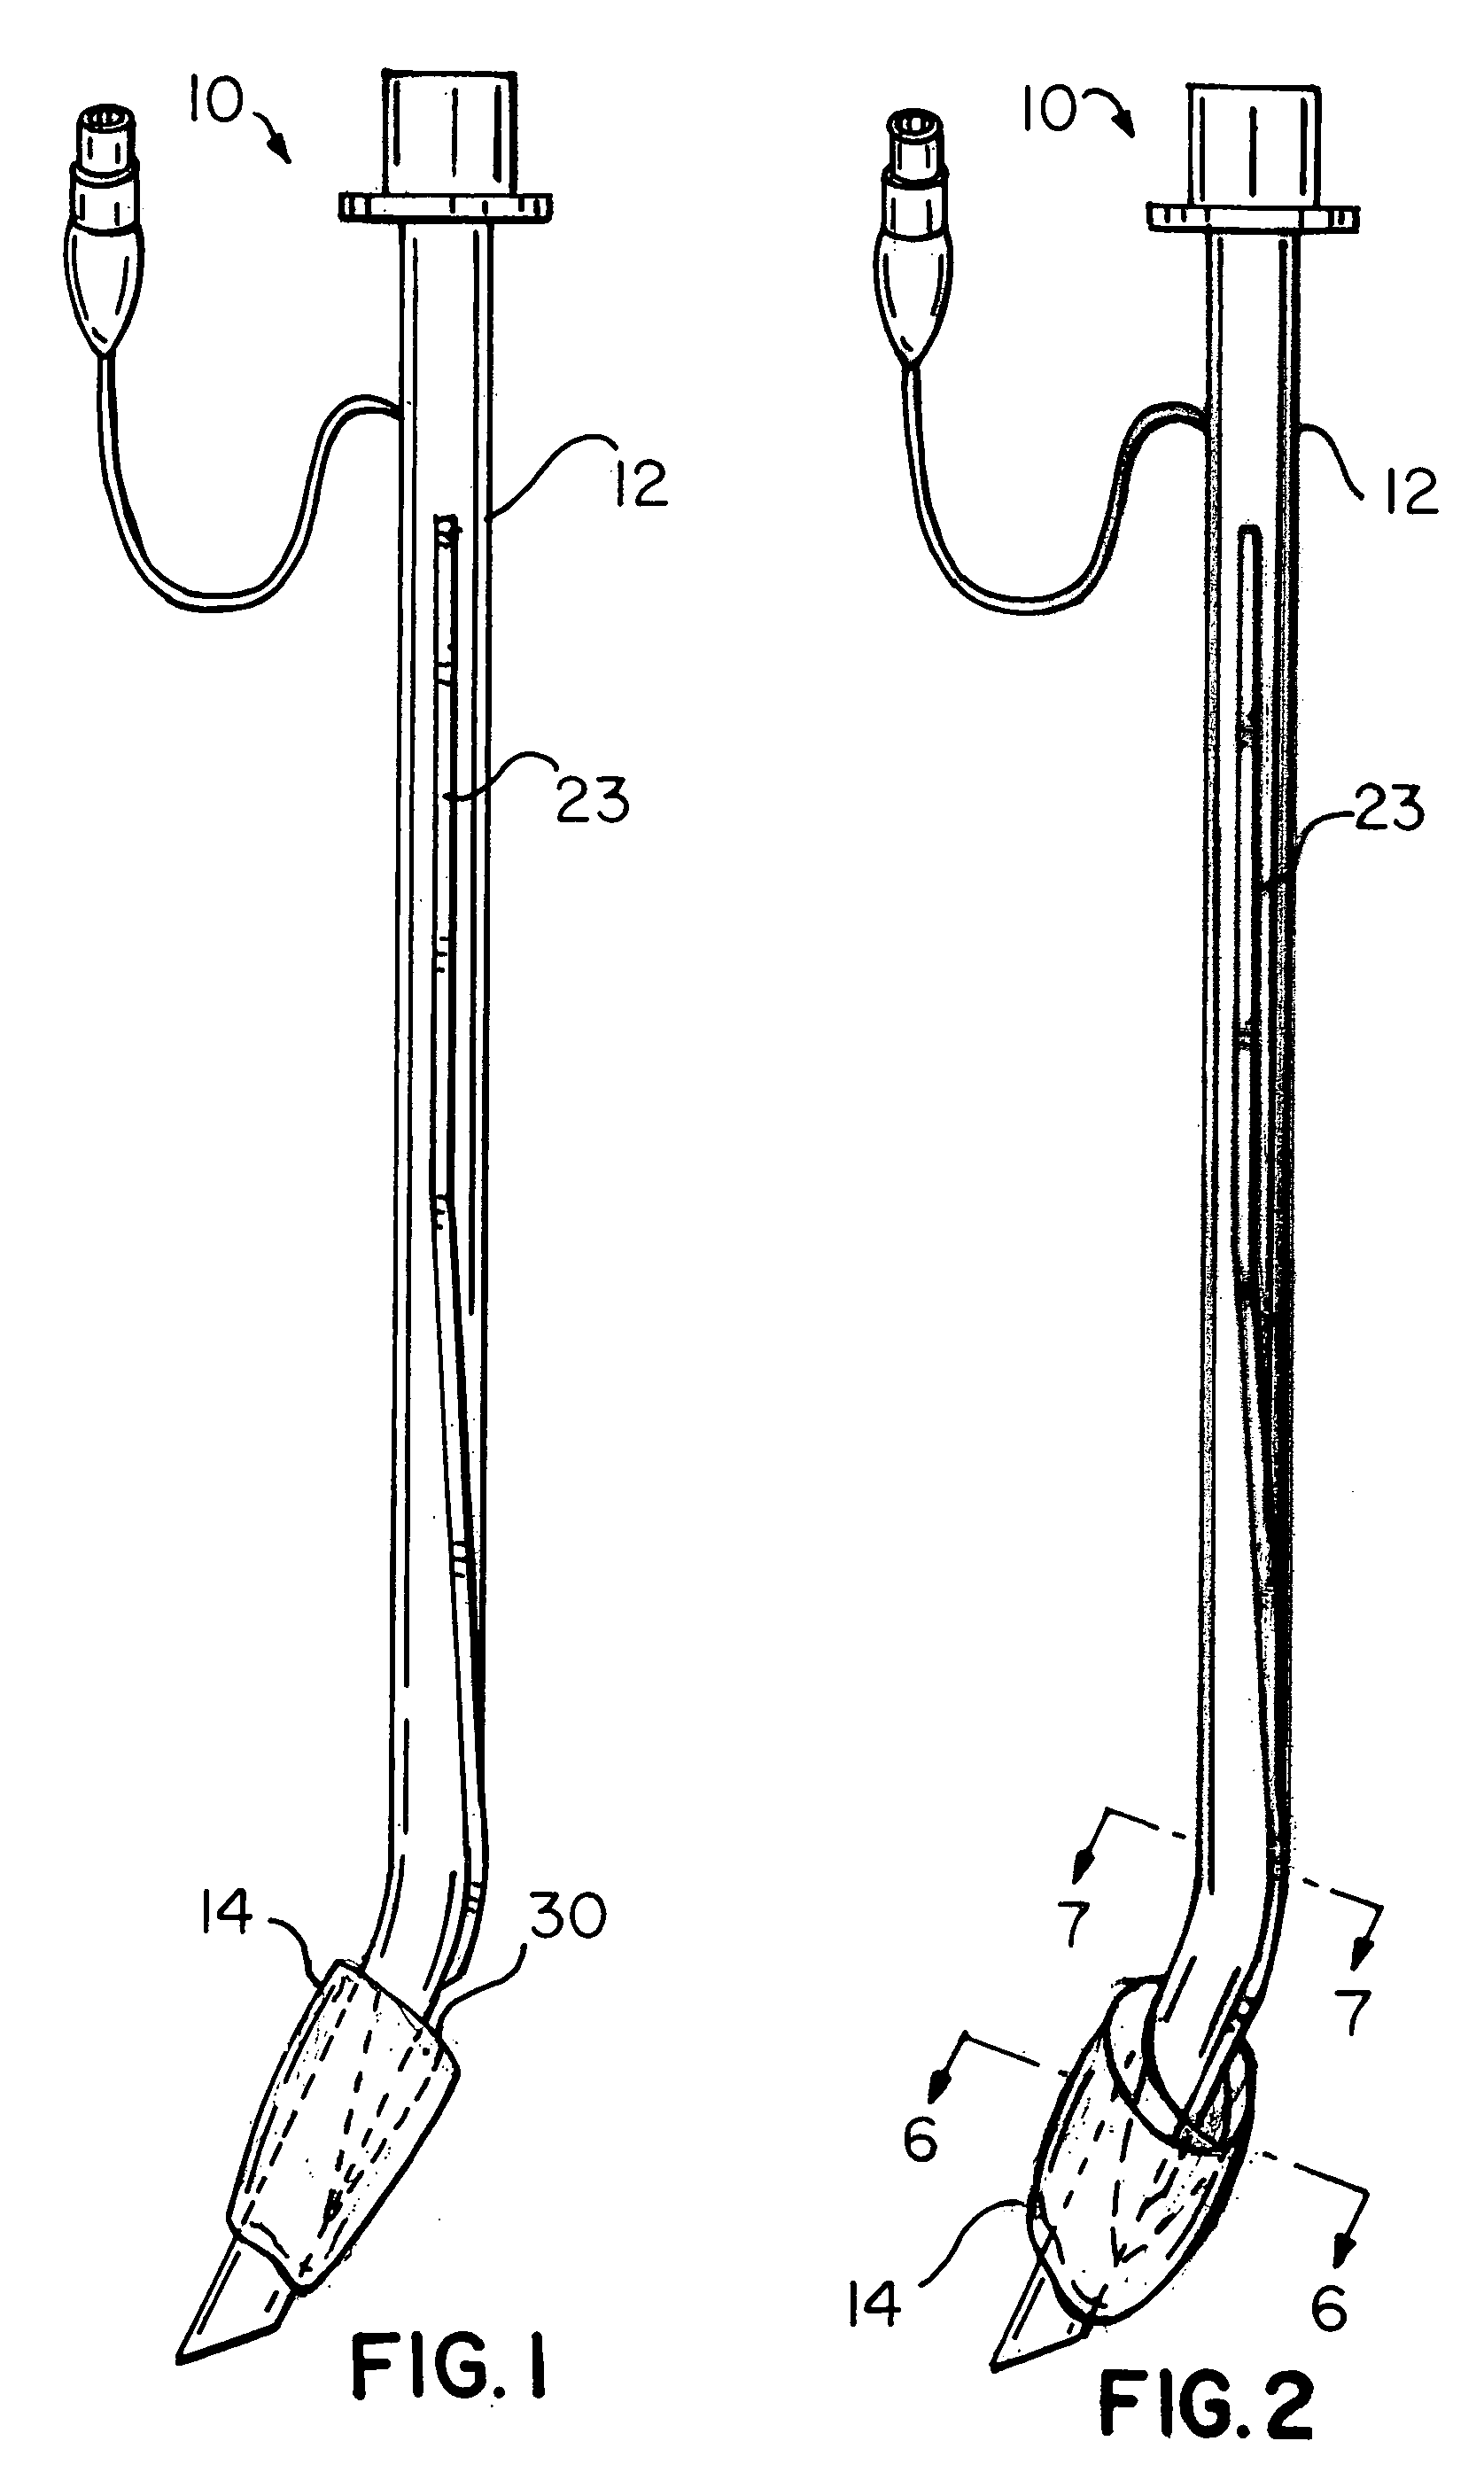 Endotrachael tube with suction catheter and system